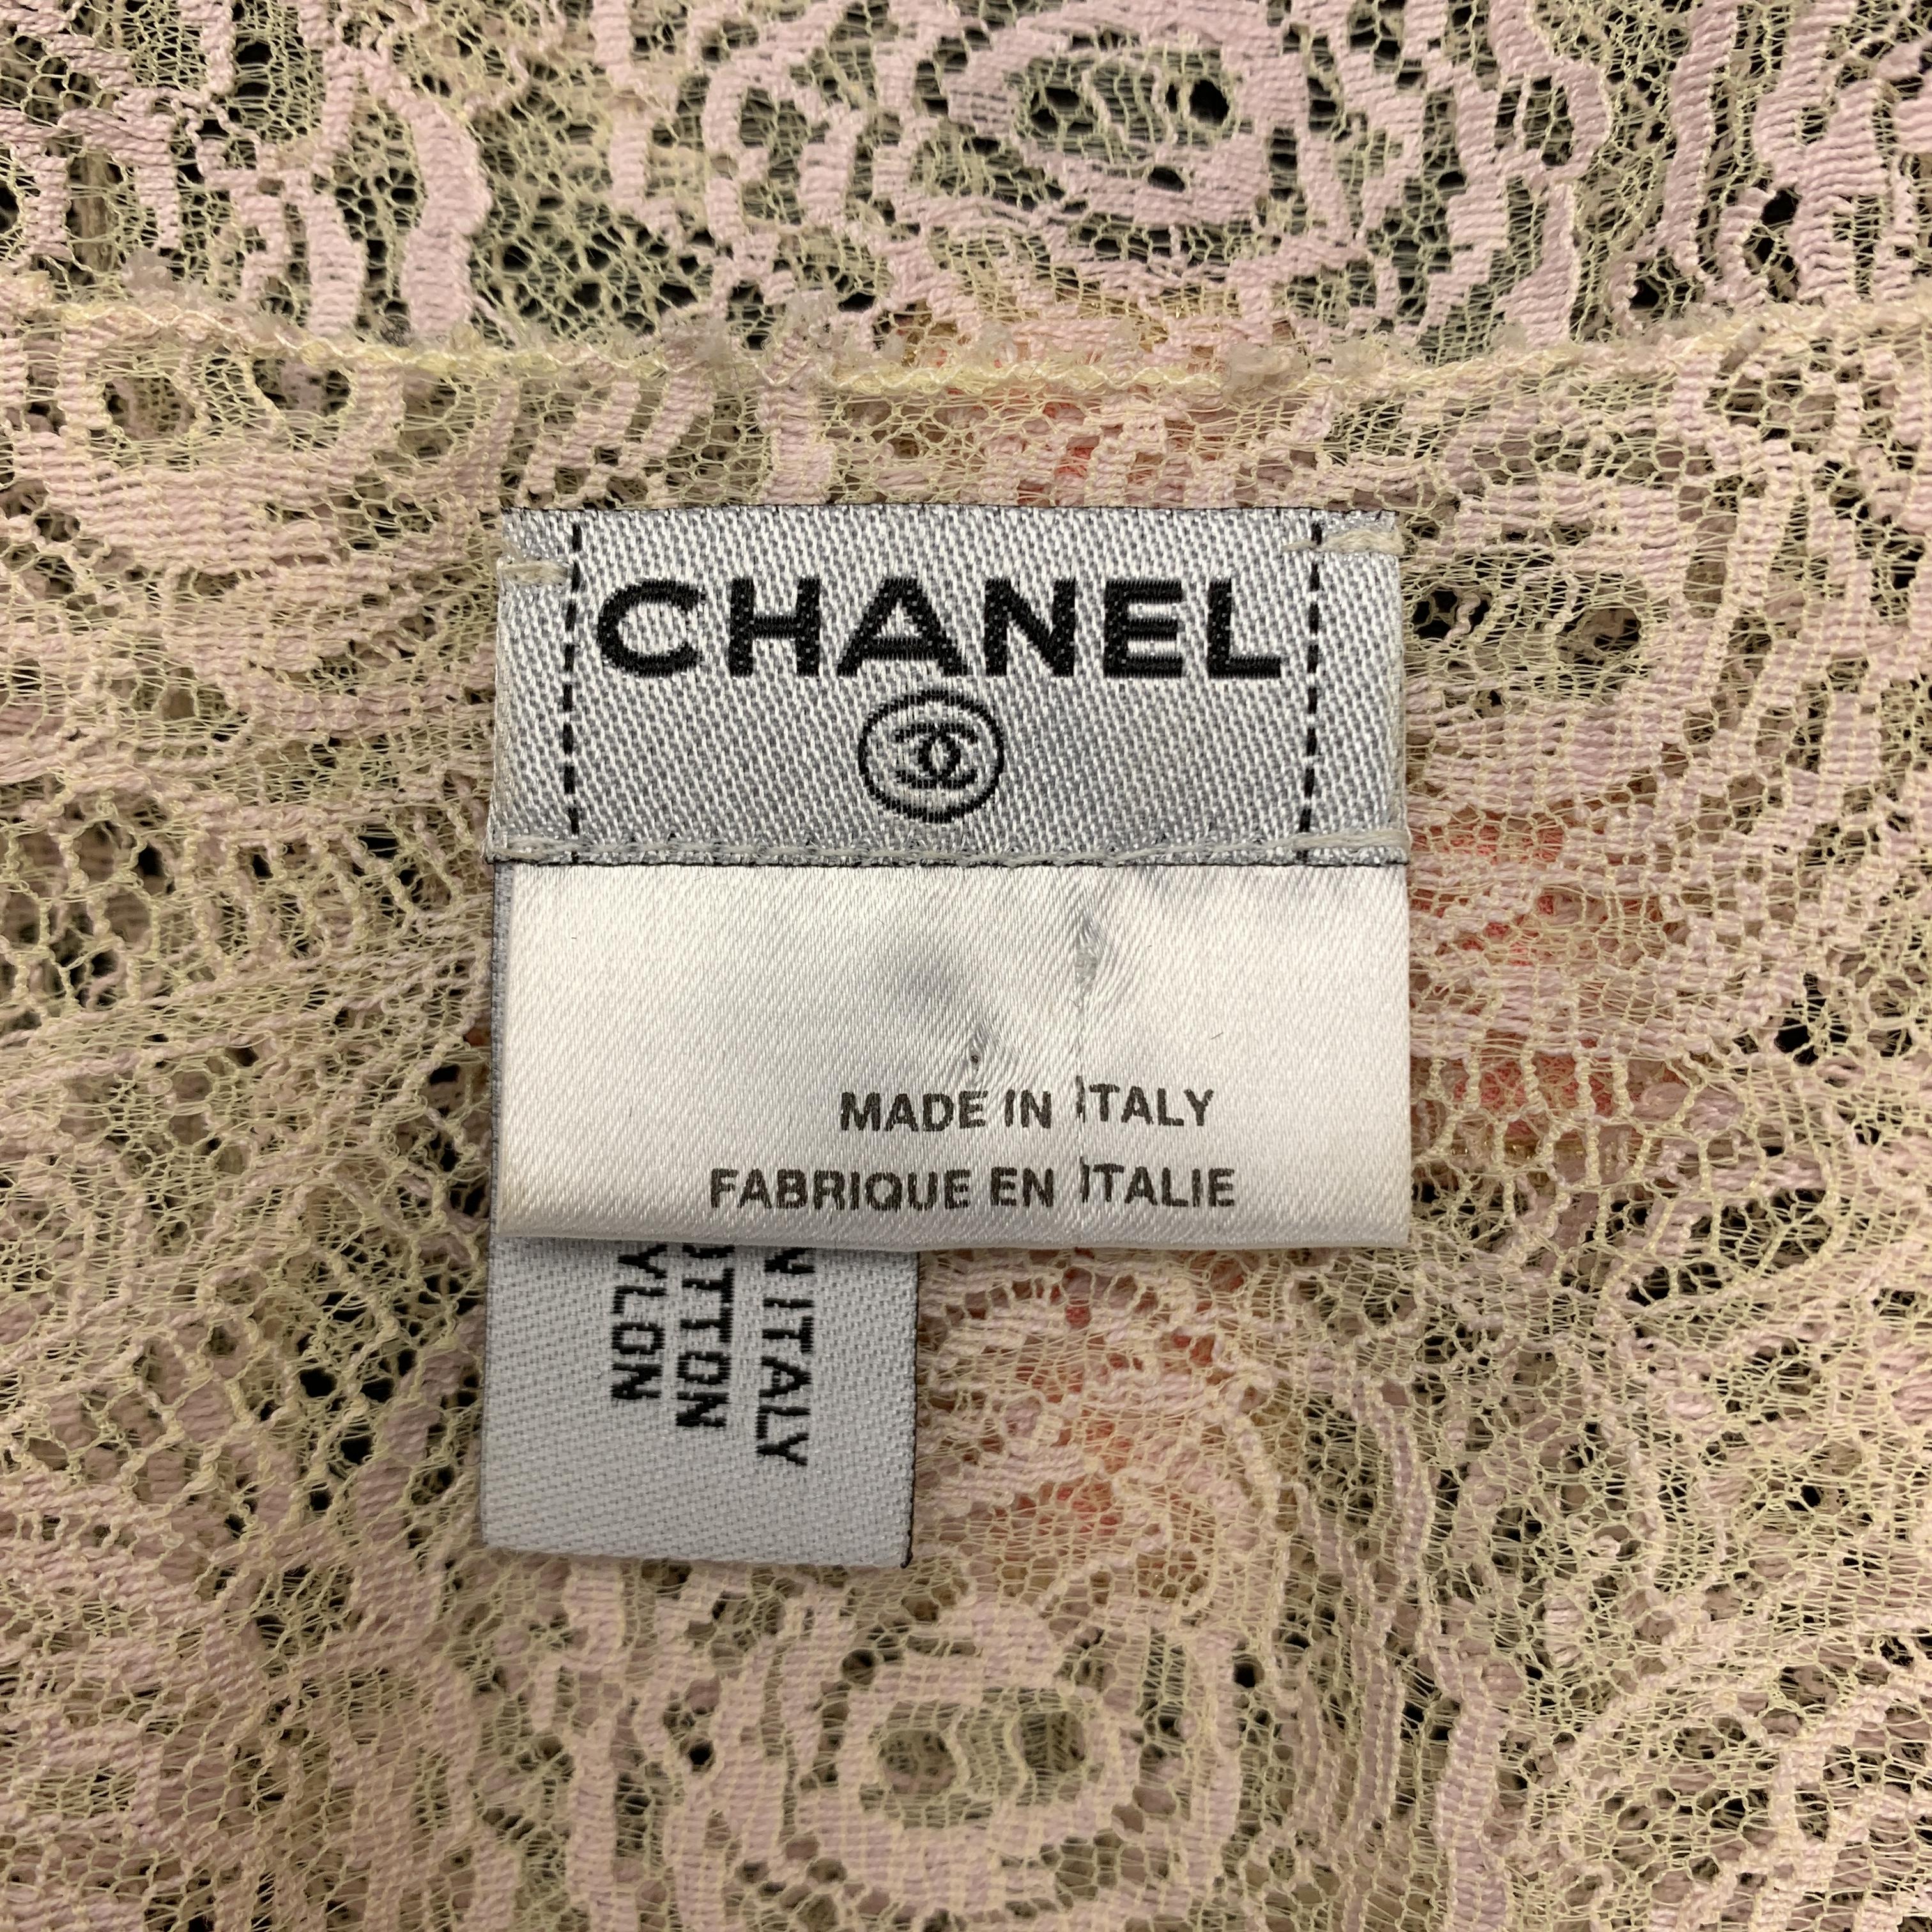 CHANEL Size 10 Beige Lace Glitter CC Pink Patch Cruise 2004 Top 1